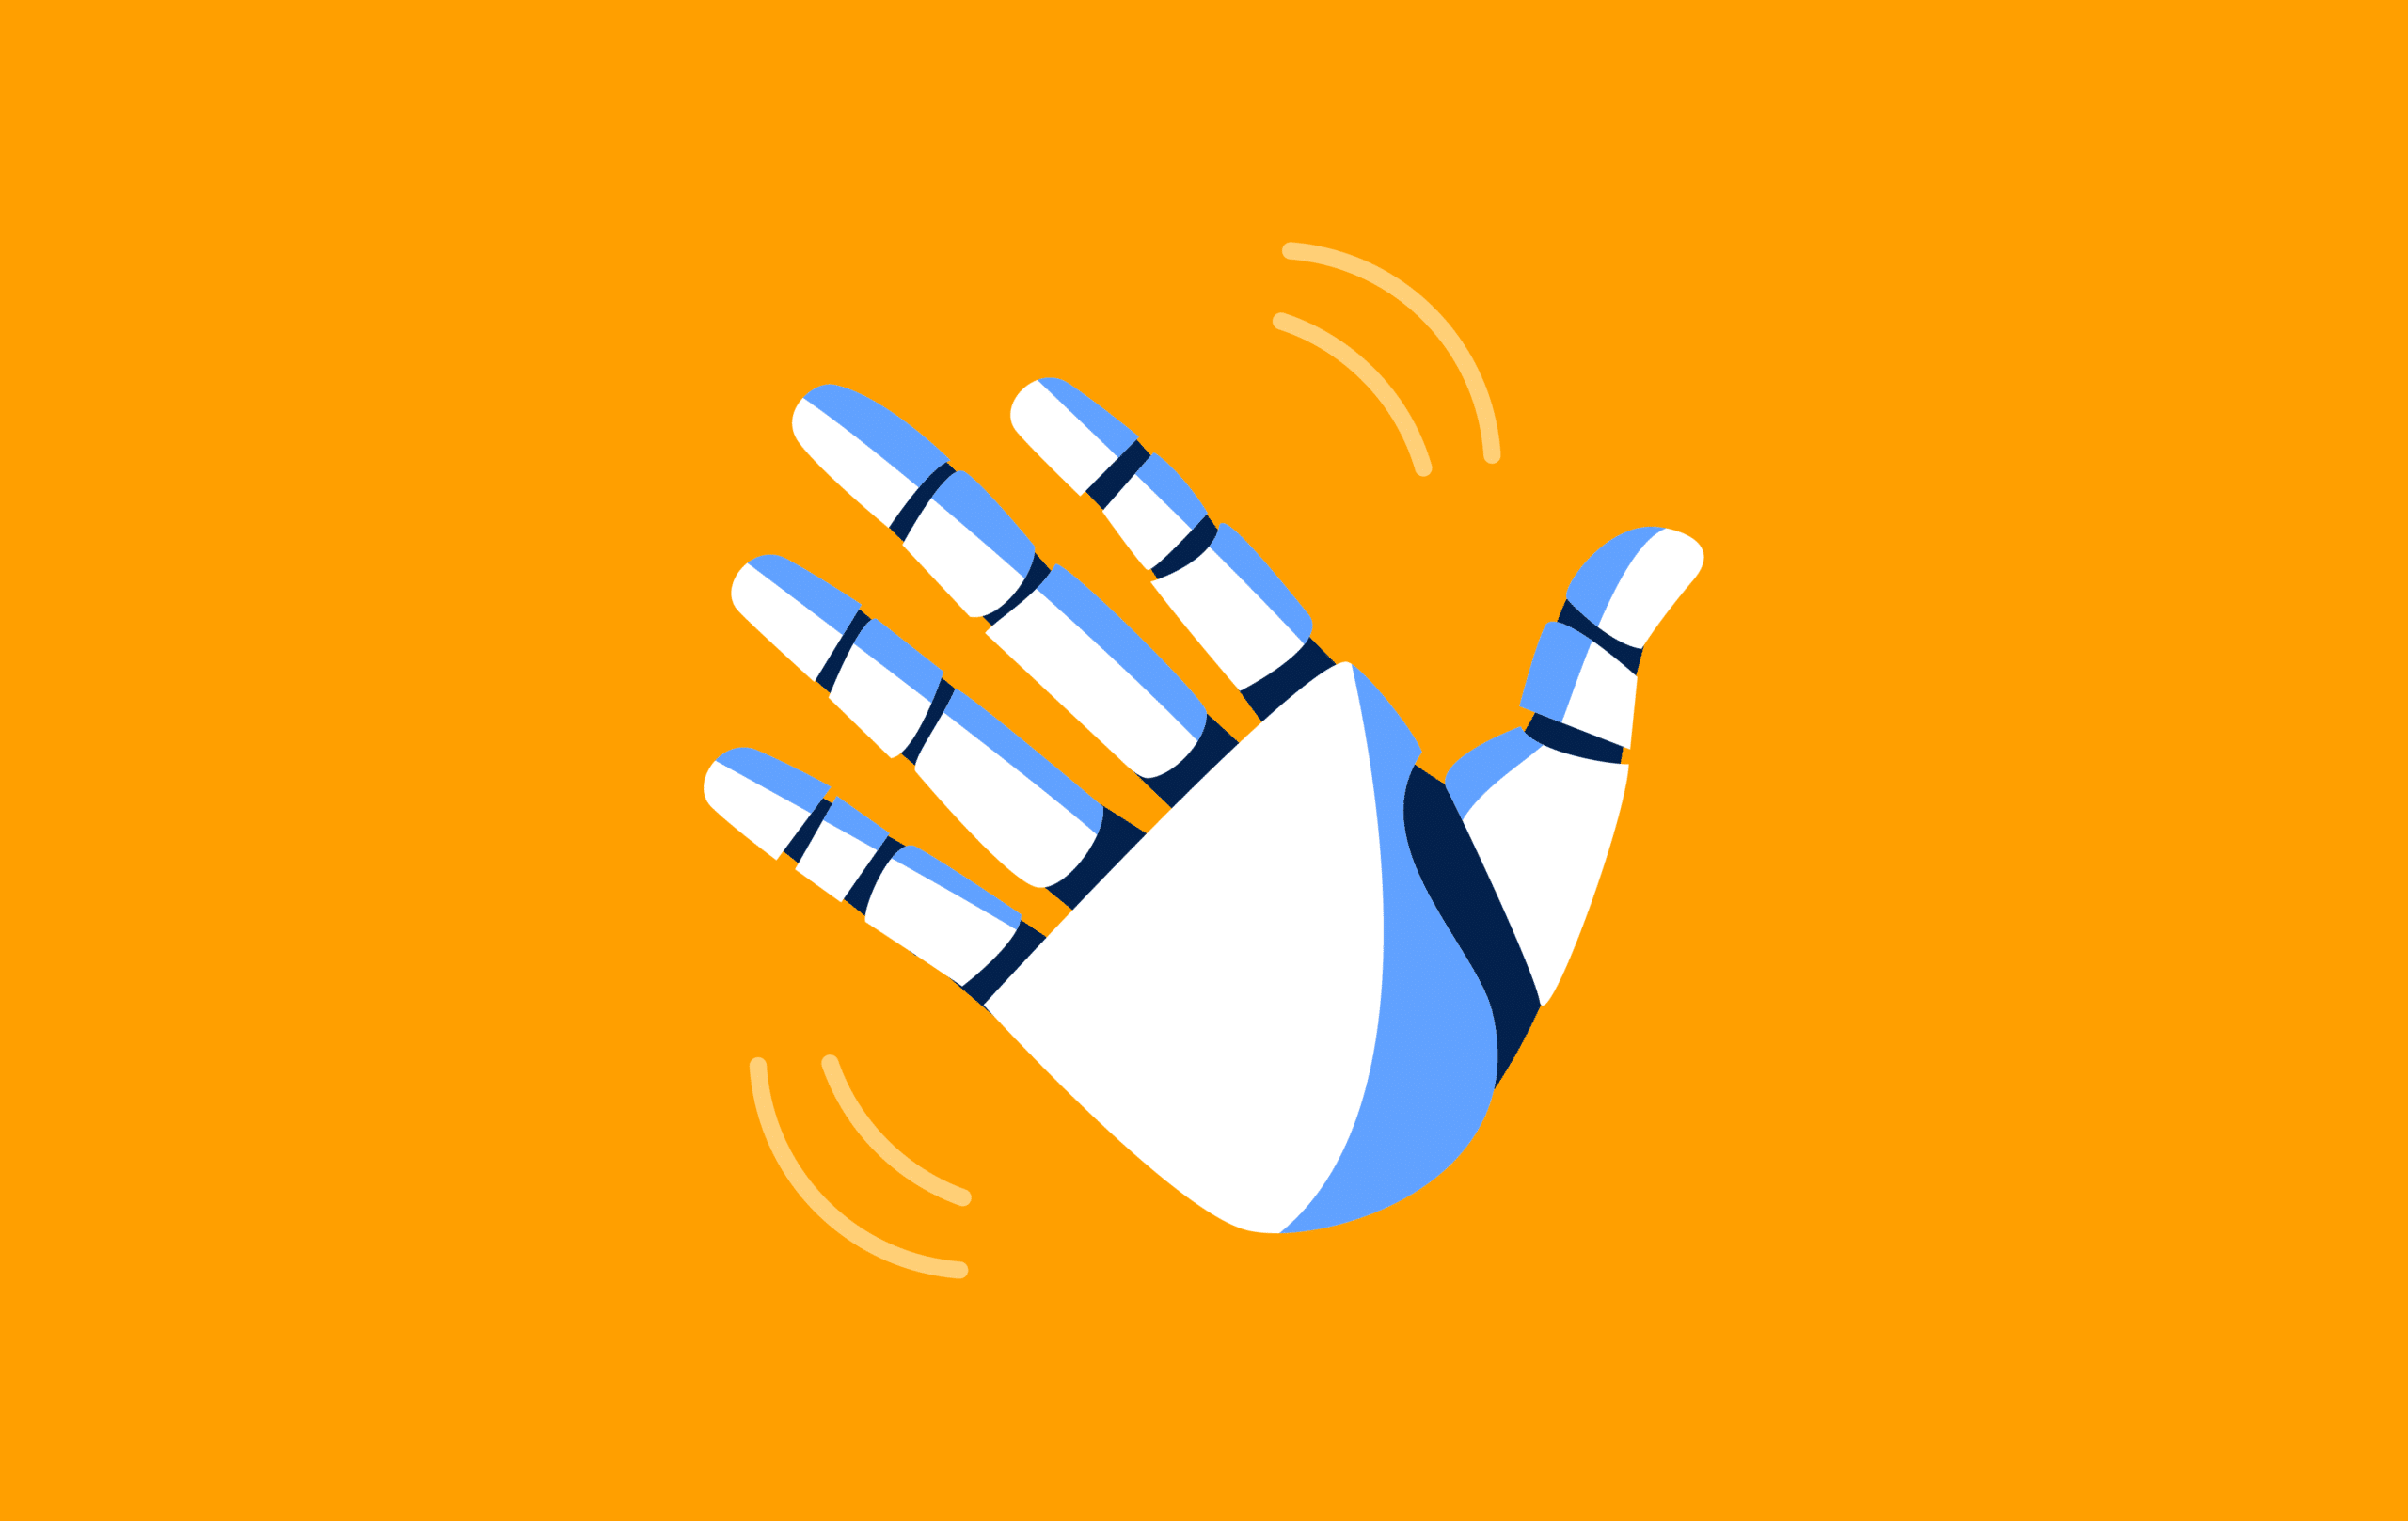 An abstract illustration of a chatbot's hand waving